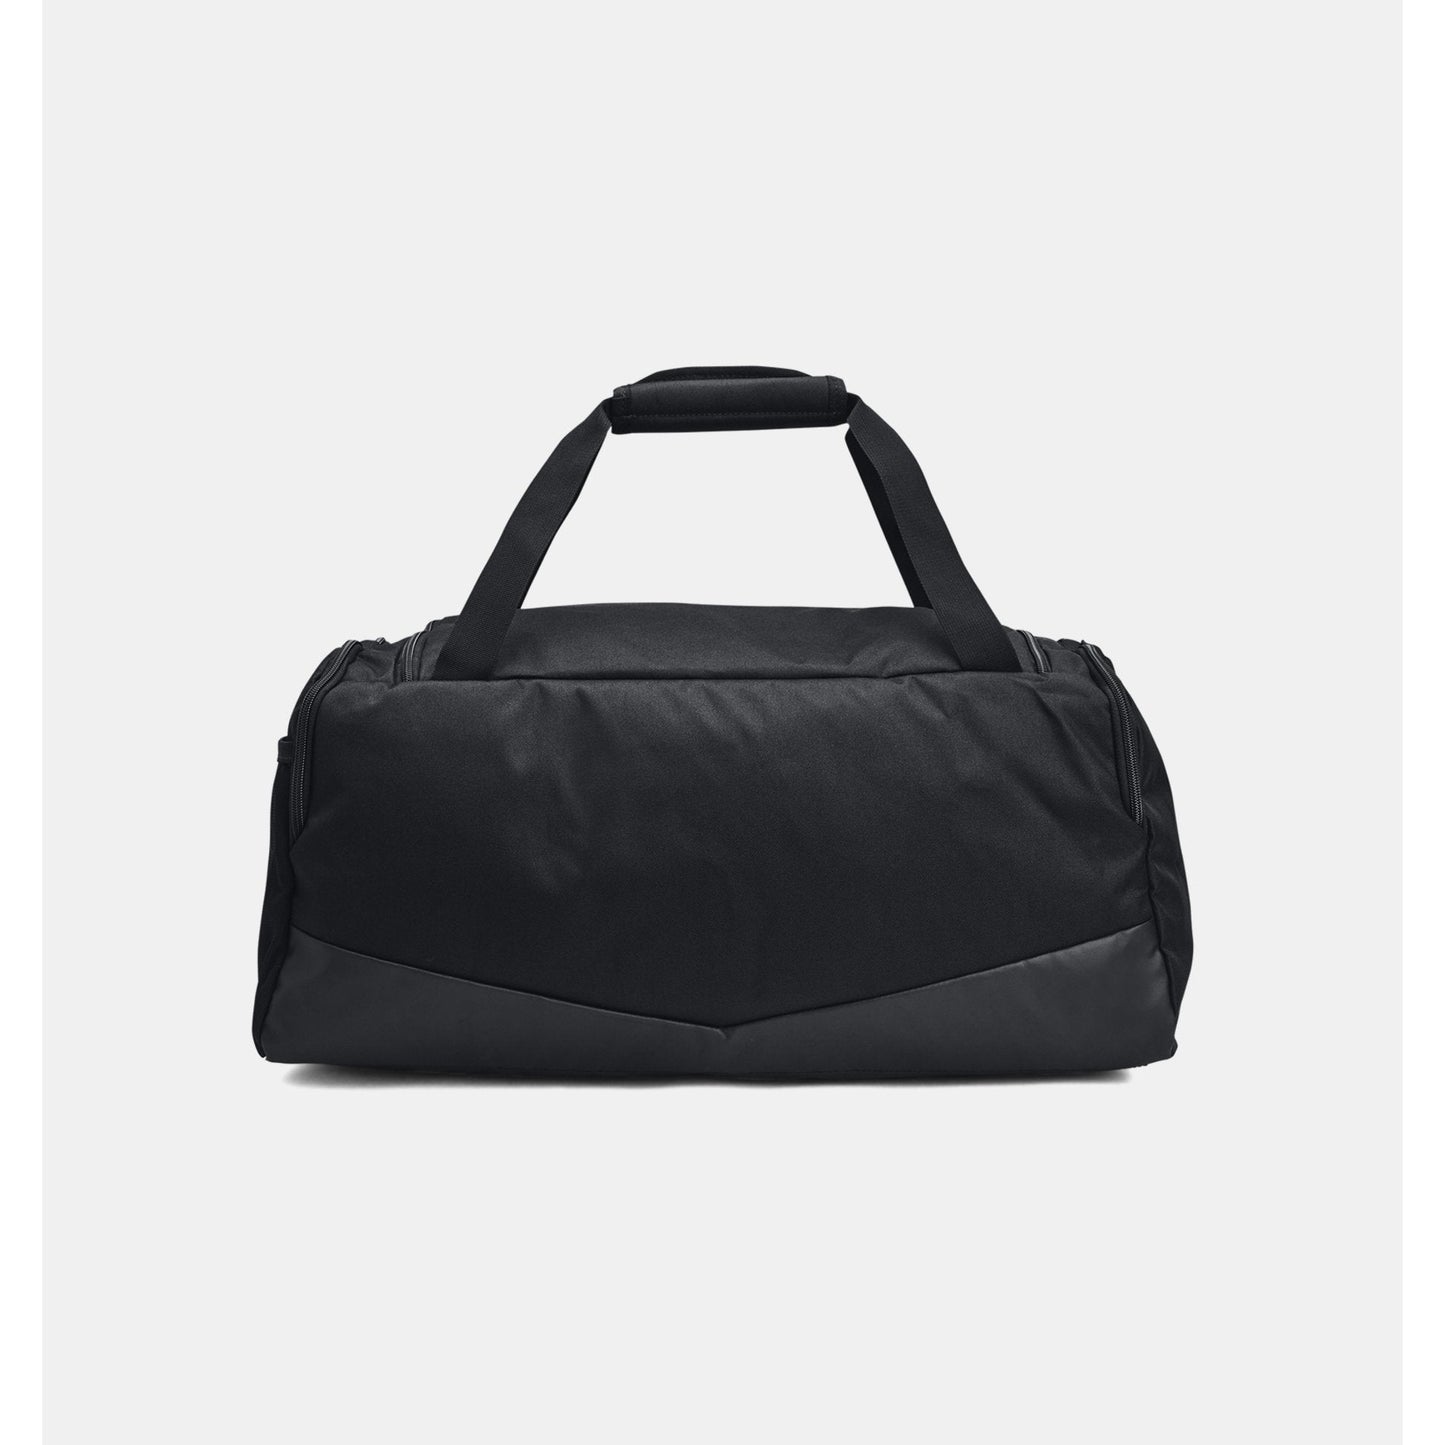 Under Armor Undeniable 5.0 Small Duffle Bag, Multiple Colors Available